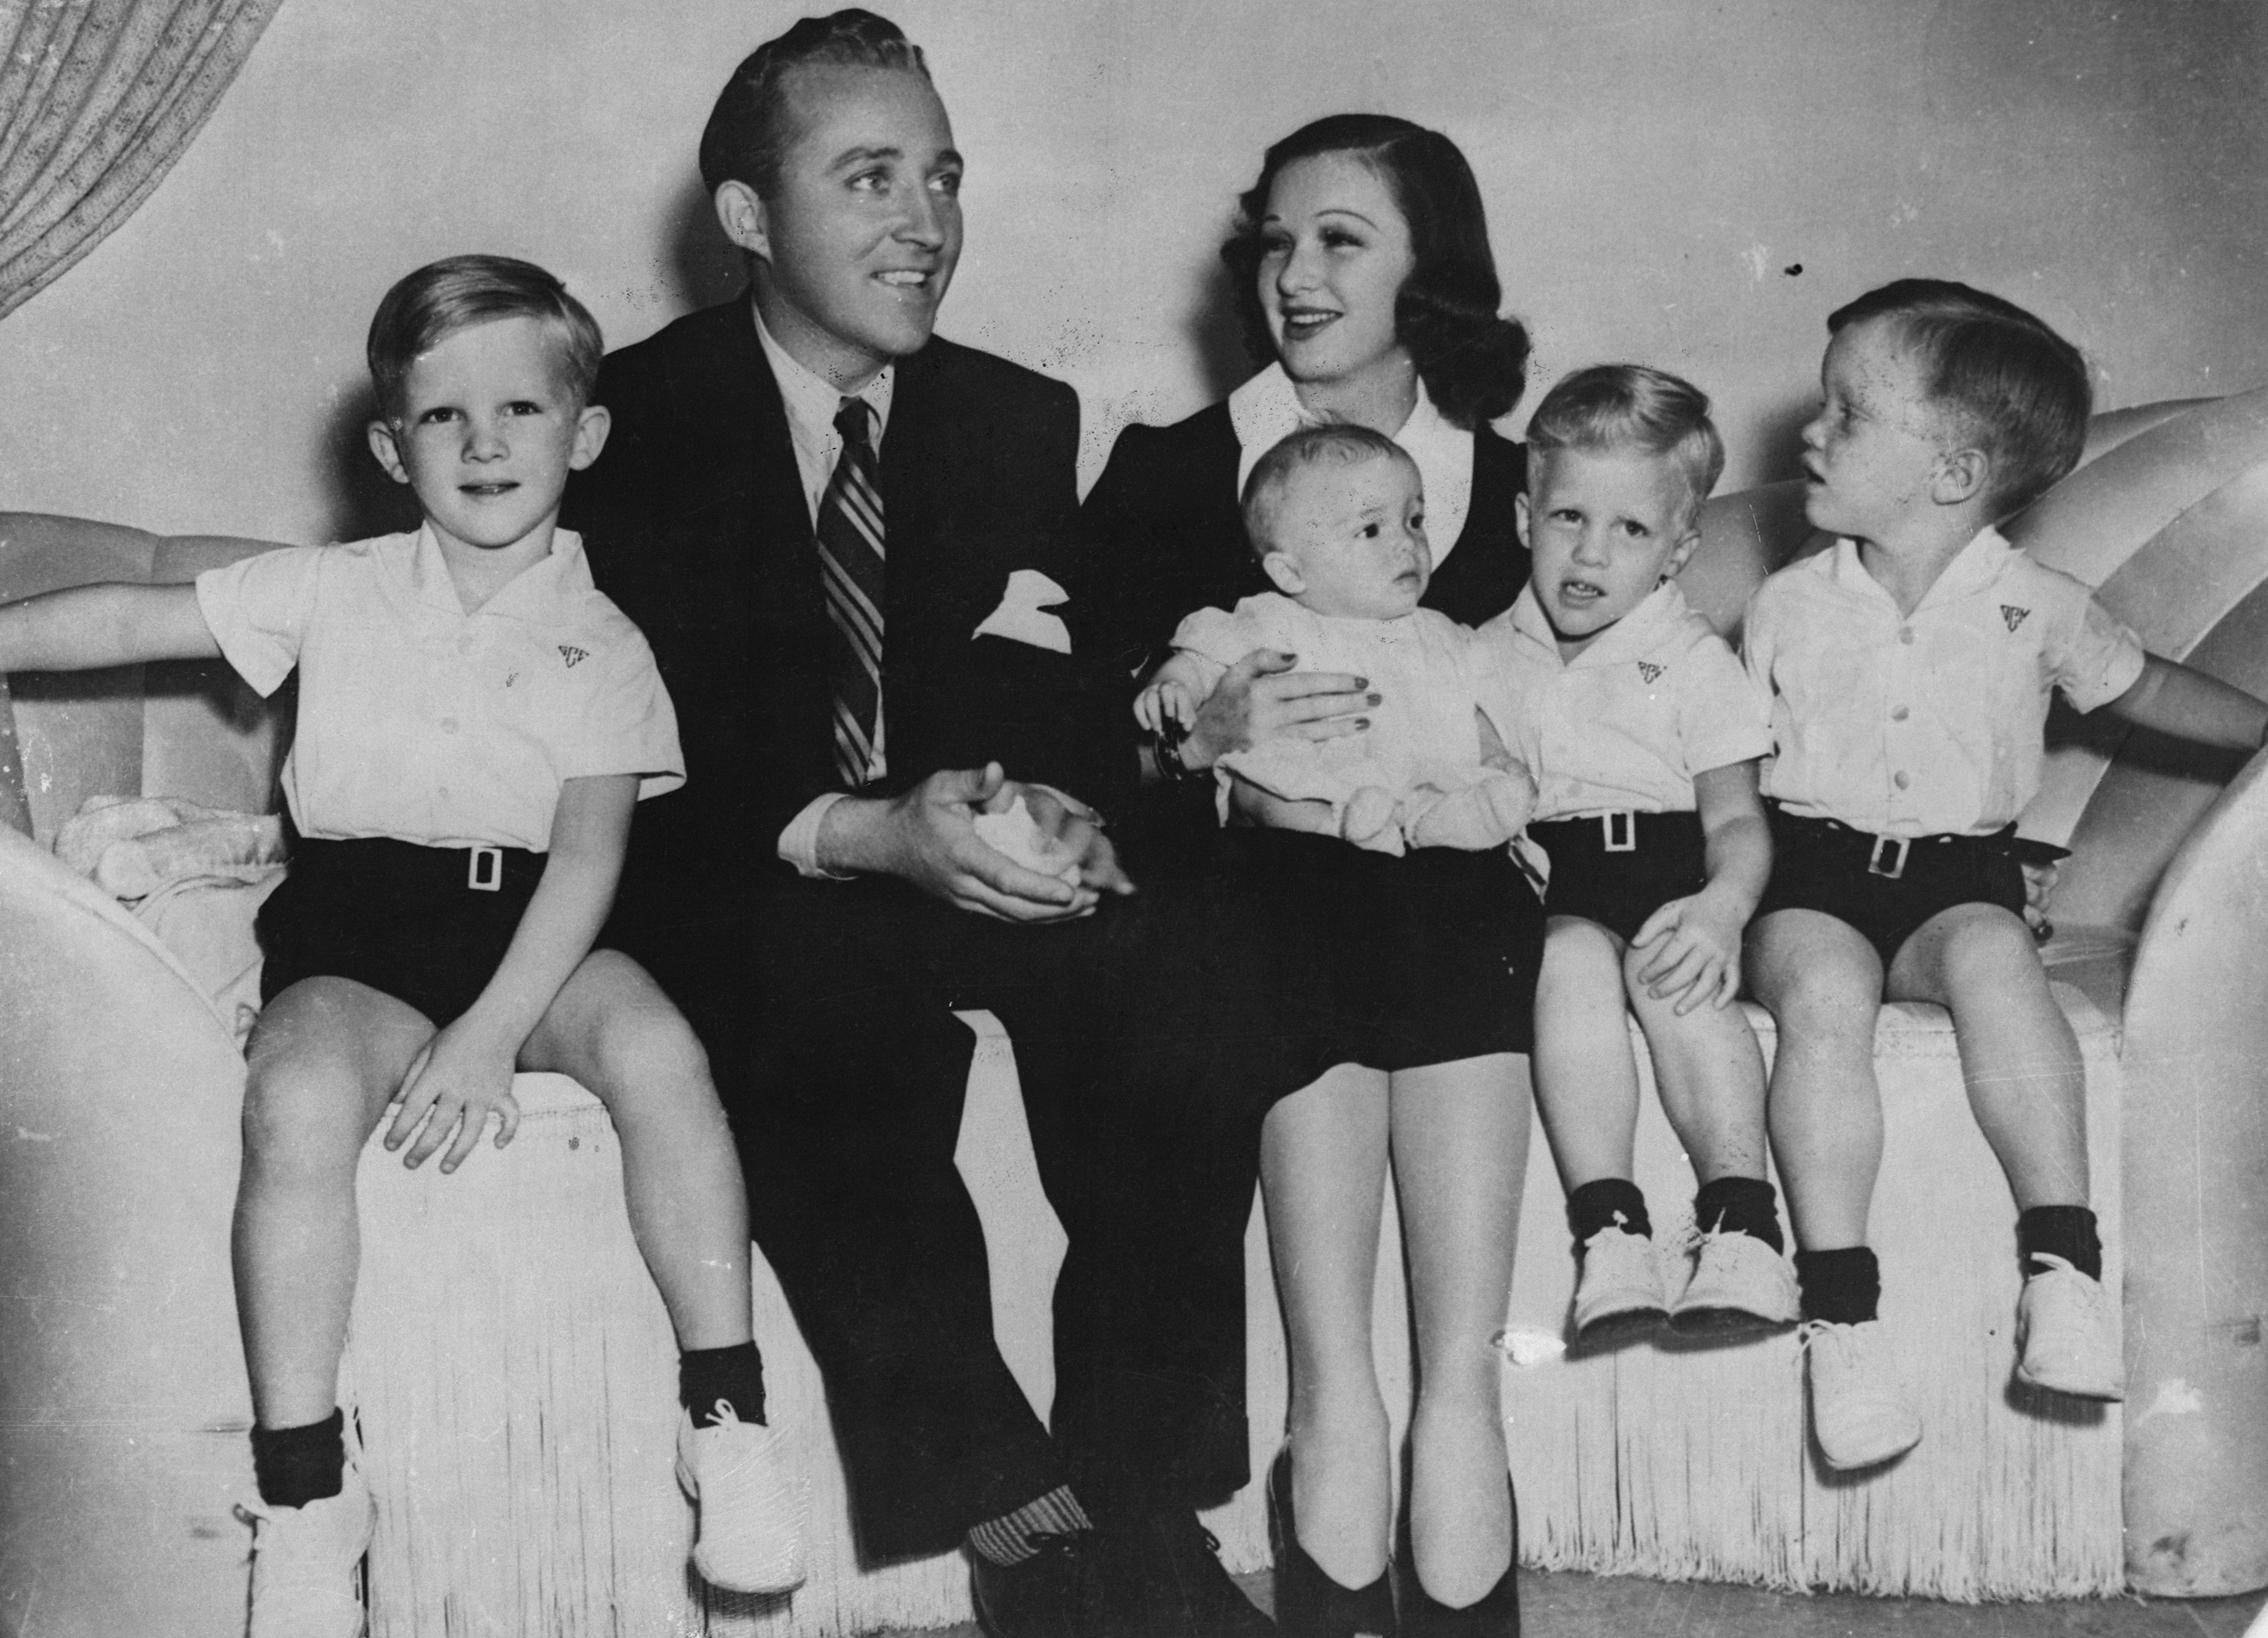 Singer and film star Bing Crosby with his first wife, actress Dixie Lee, and their sons Gary, Lindsay. and twins Dennis and Phillip. | Source: Getty Images